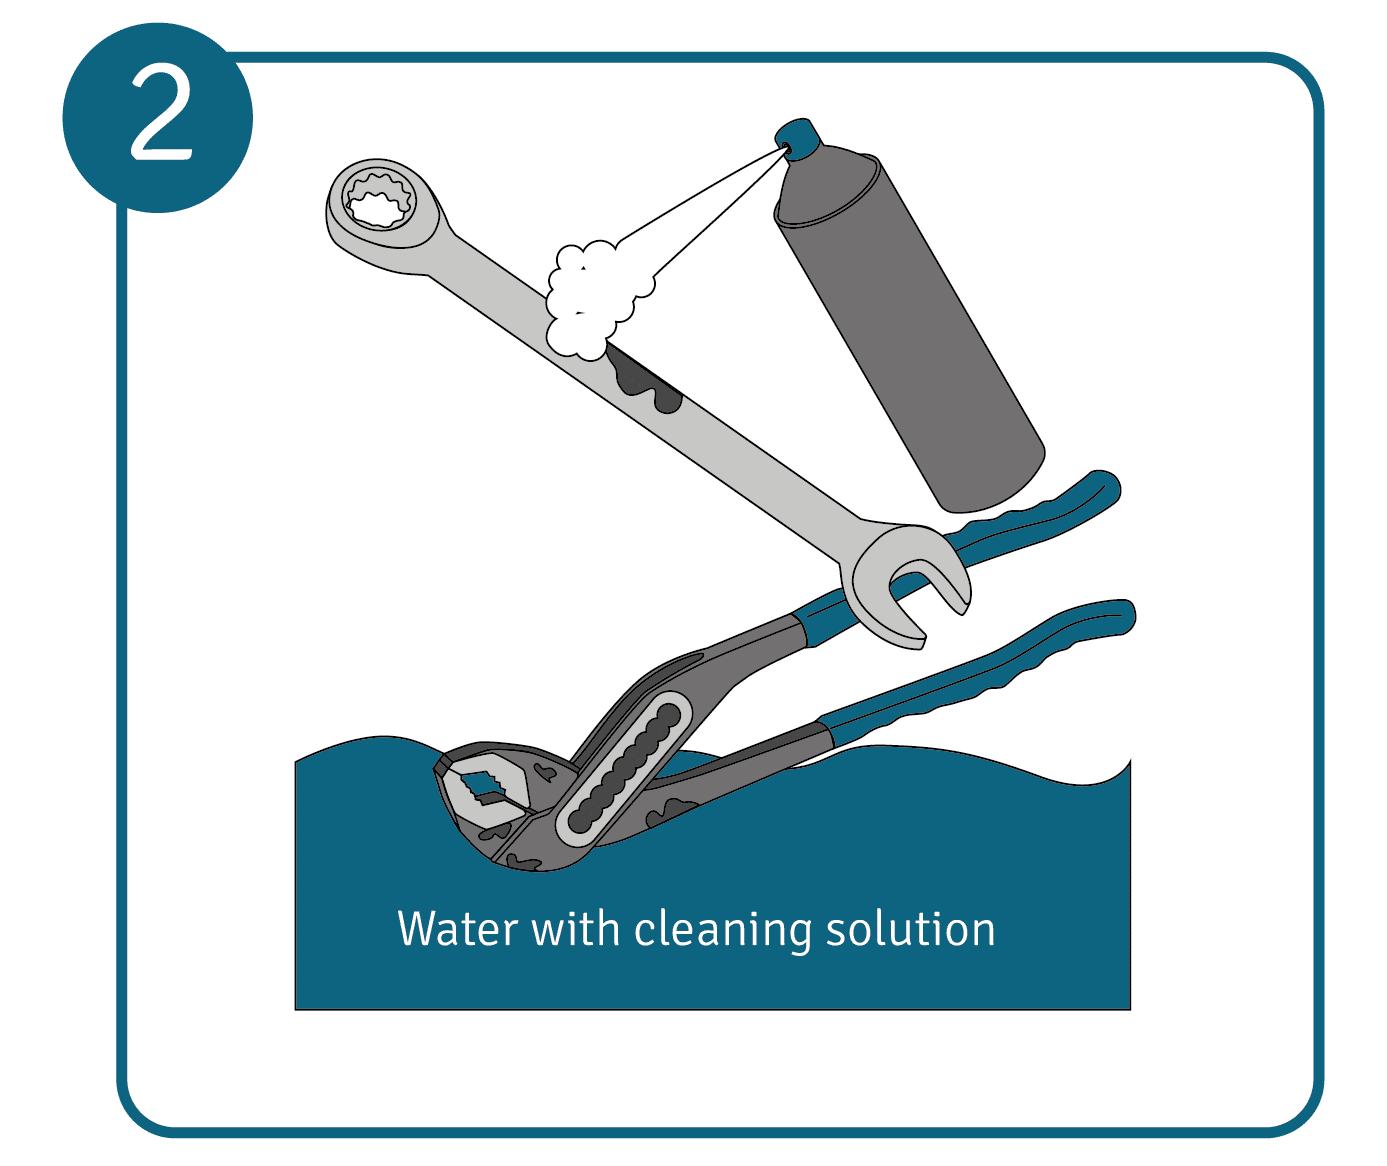 Spray tools with a cleaner or submerge them in a cleaning solution.